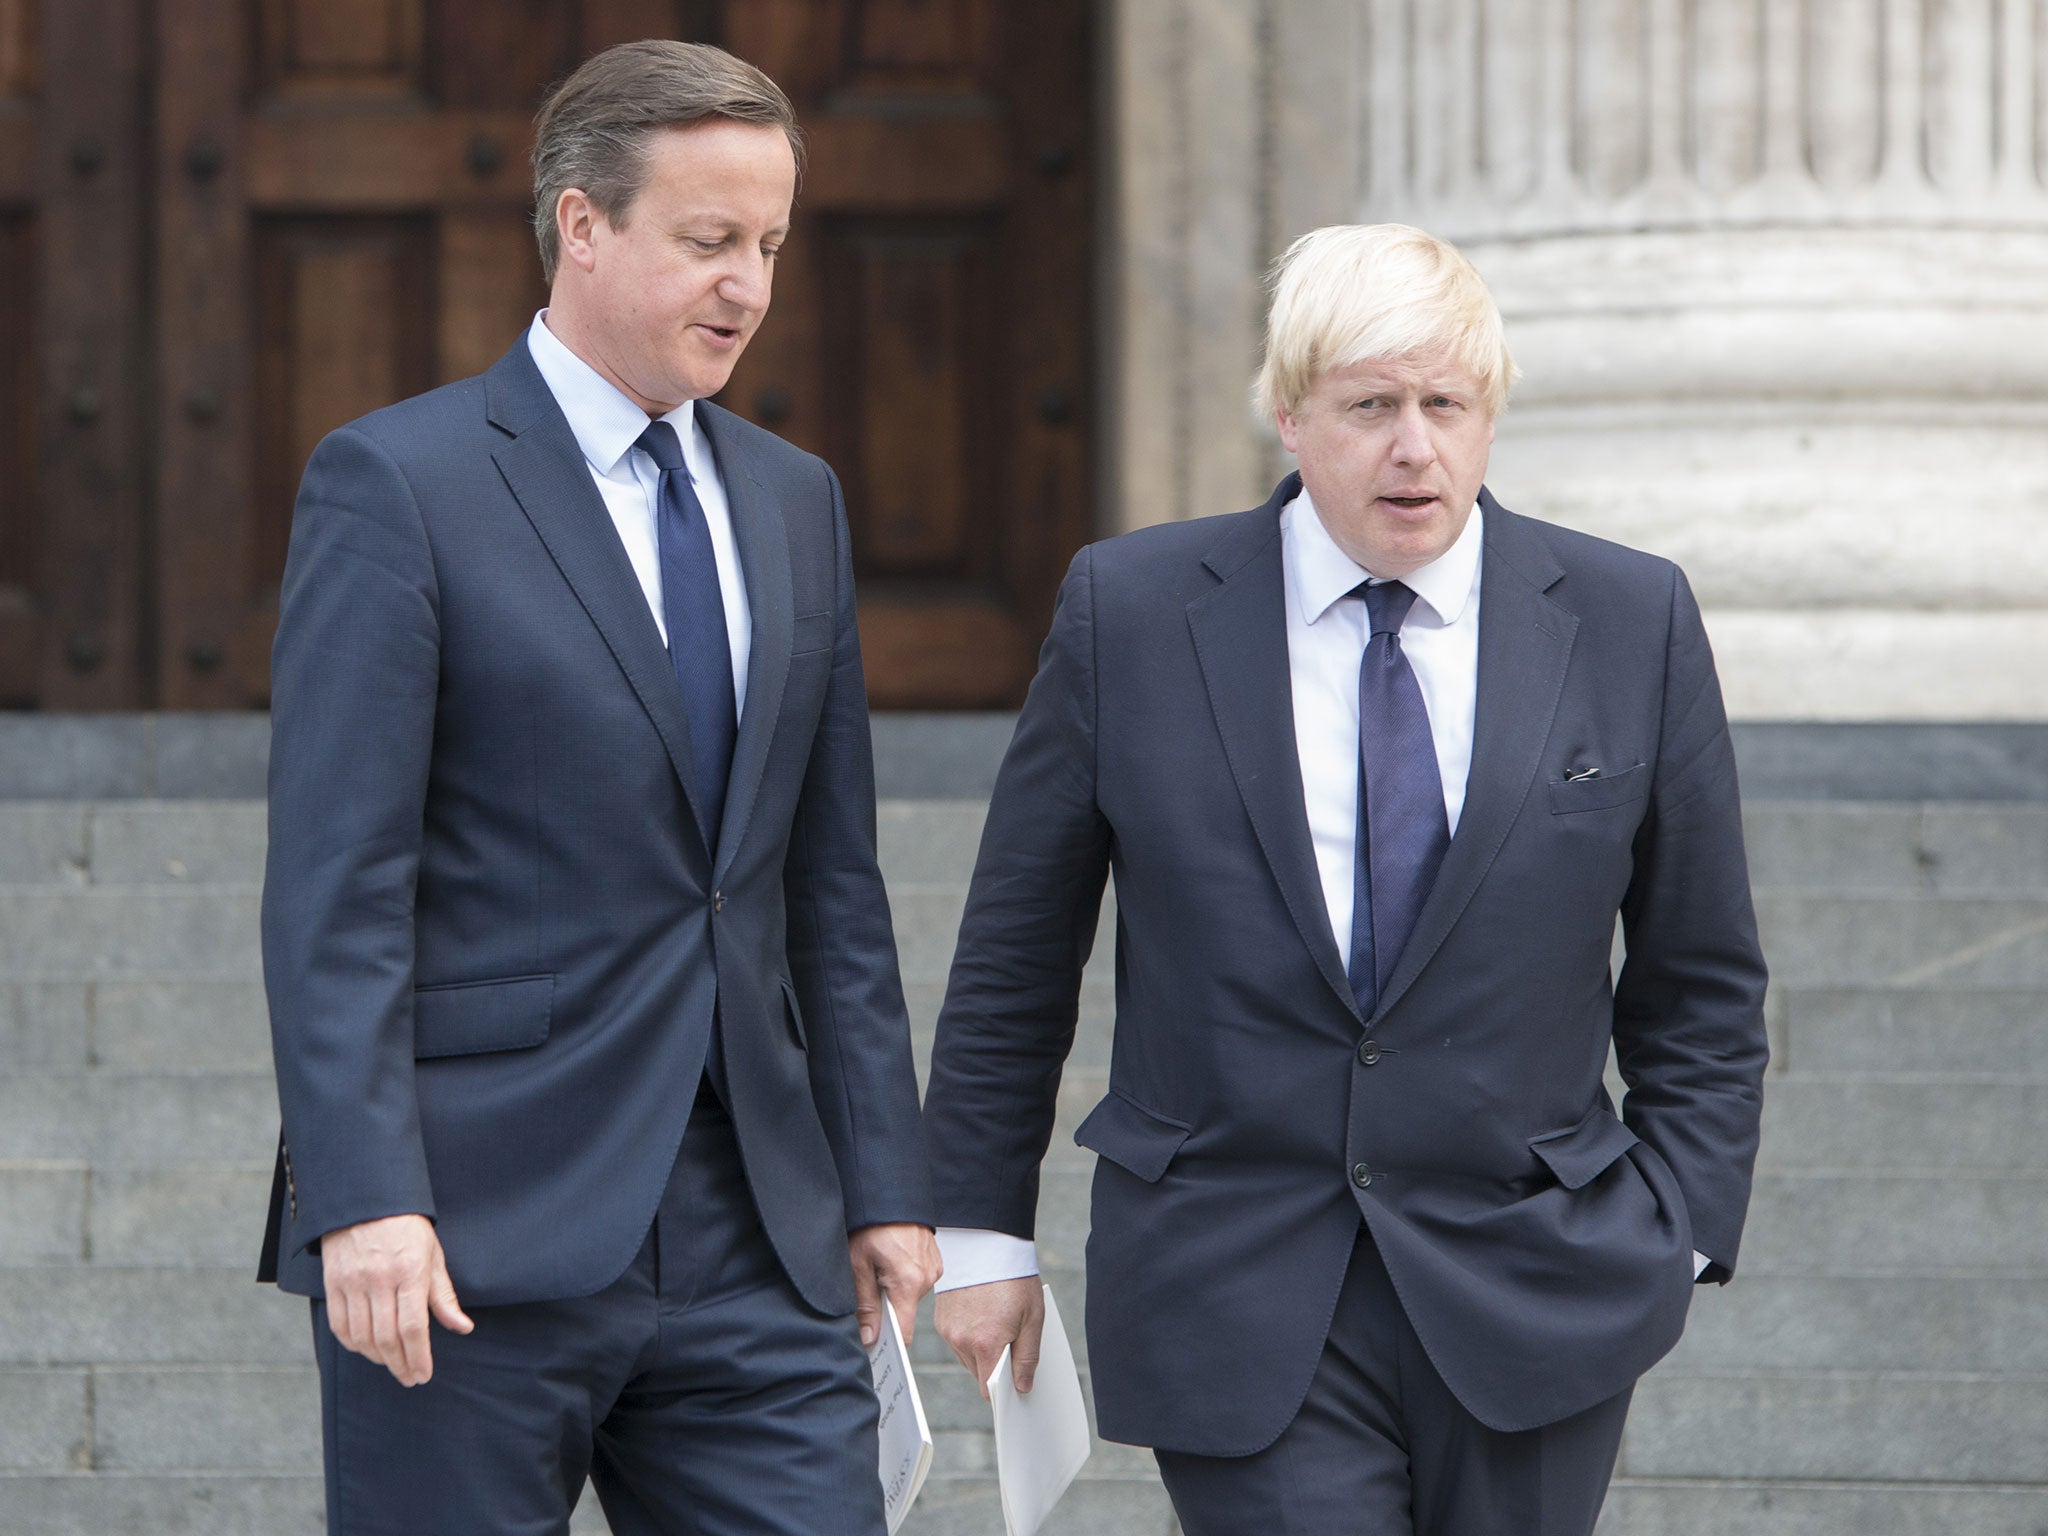 Some of David Cameron's remarks were seen to be aimed at Johnson, who has experienced trouble in his marriage